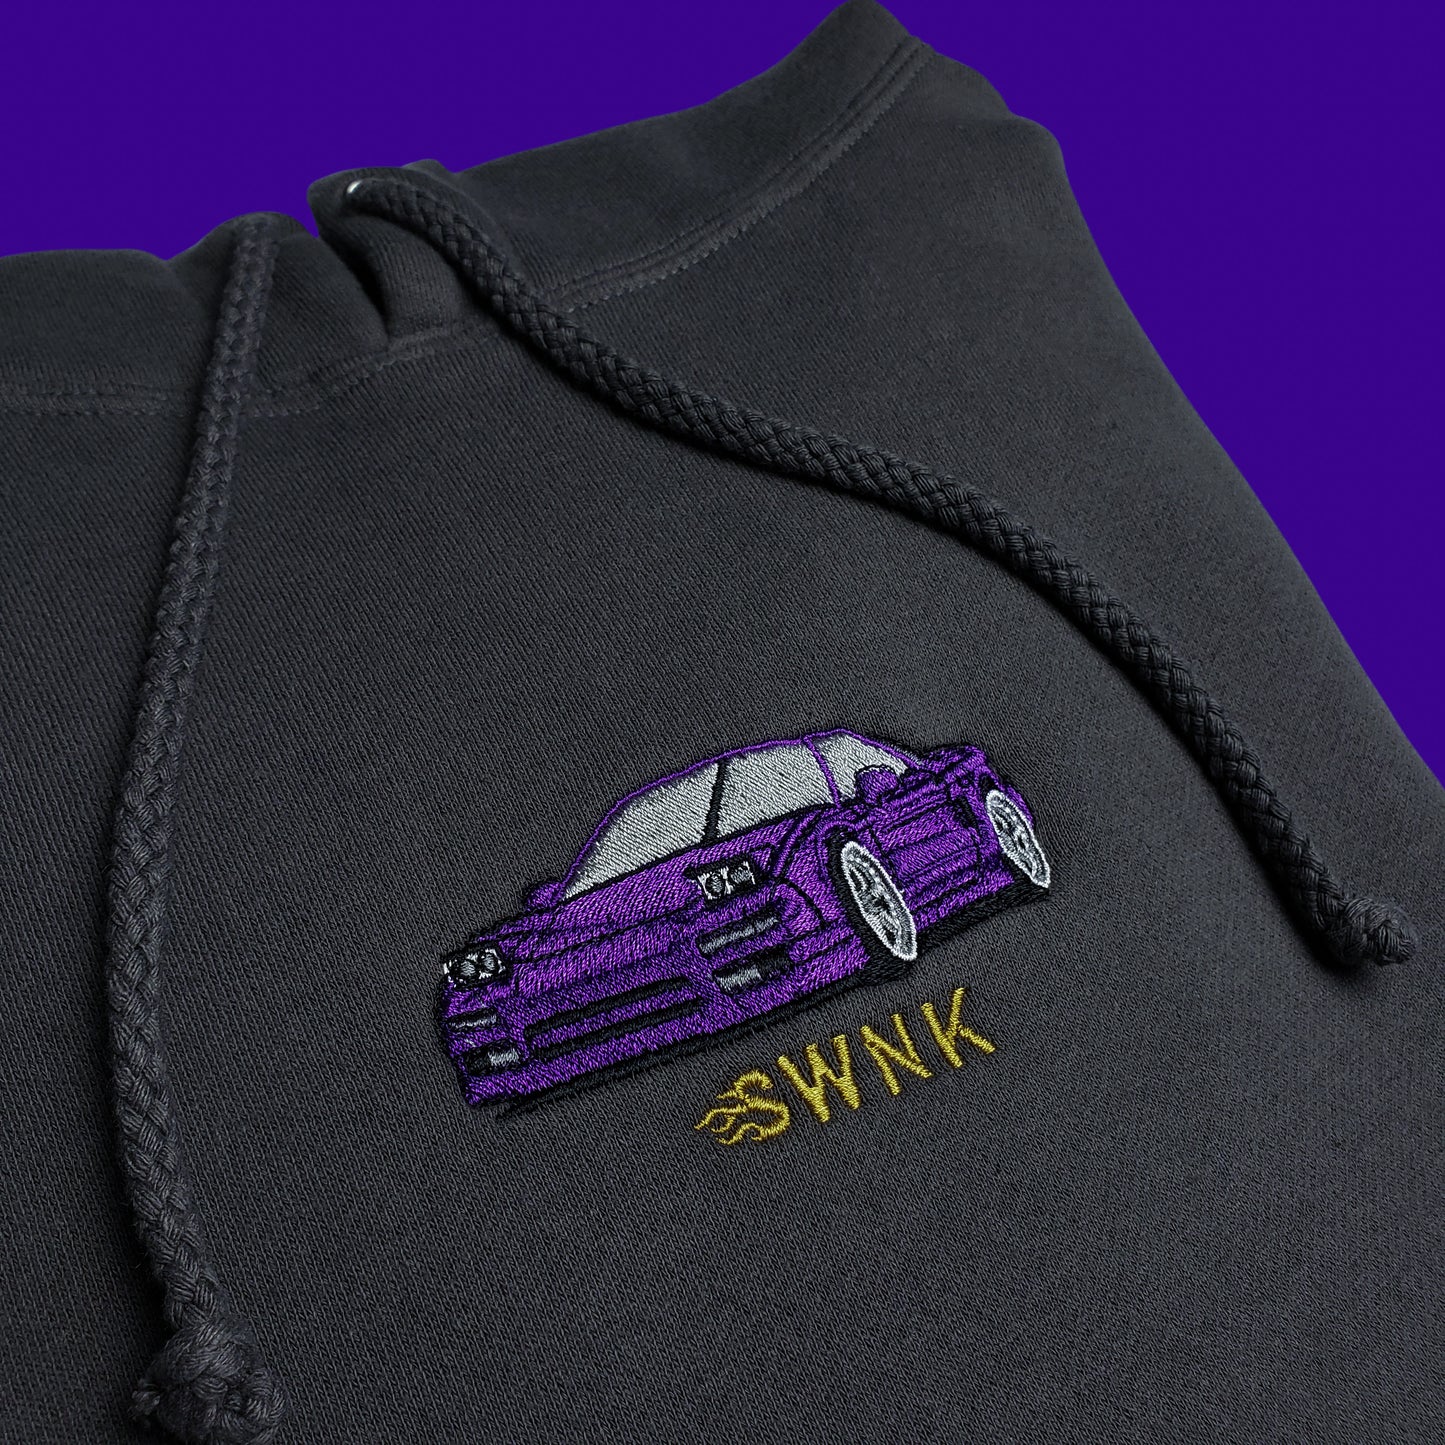 SWNK "Dino" NSX Embroidered Hoodie